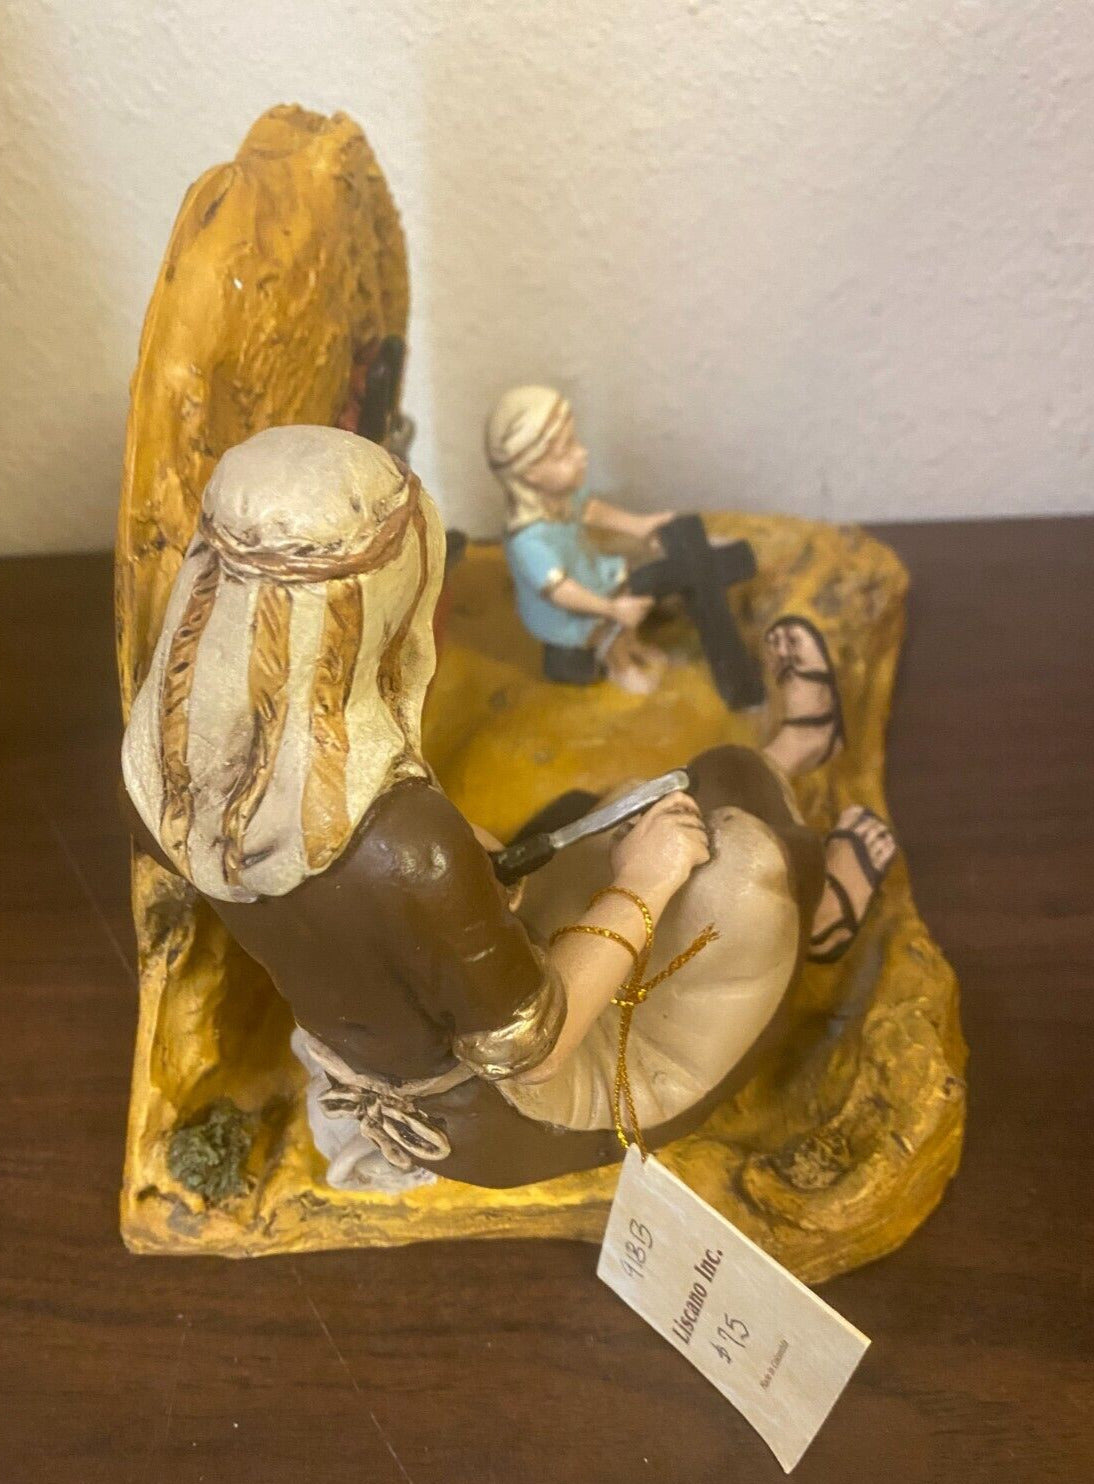 Saint Joseph the Worker with Child Jesus  New from Colombia - Bob and Penny Lord